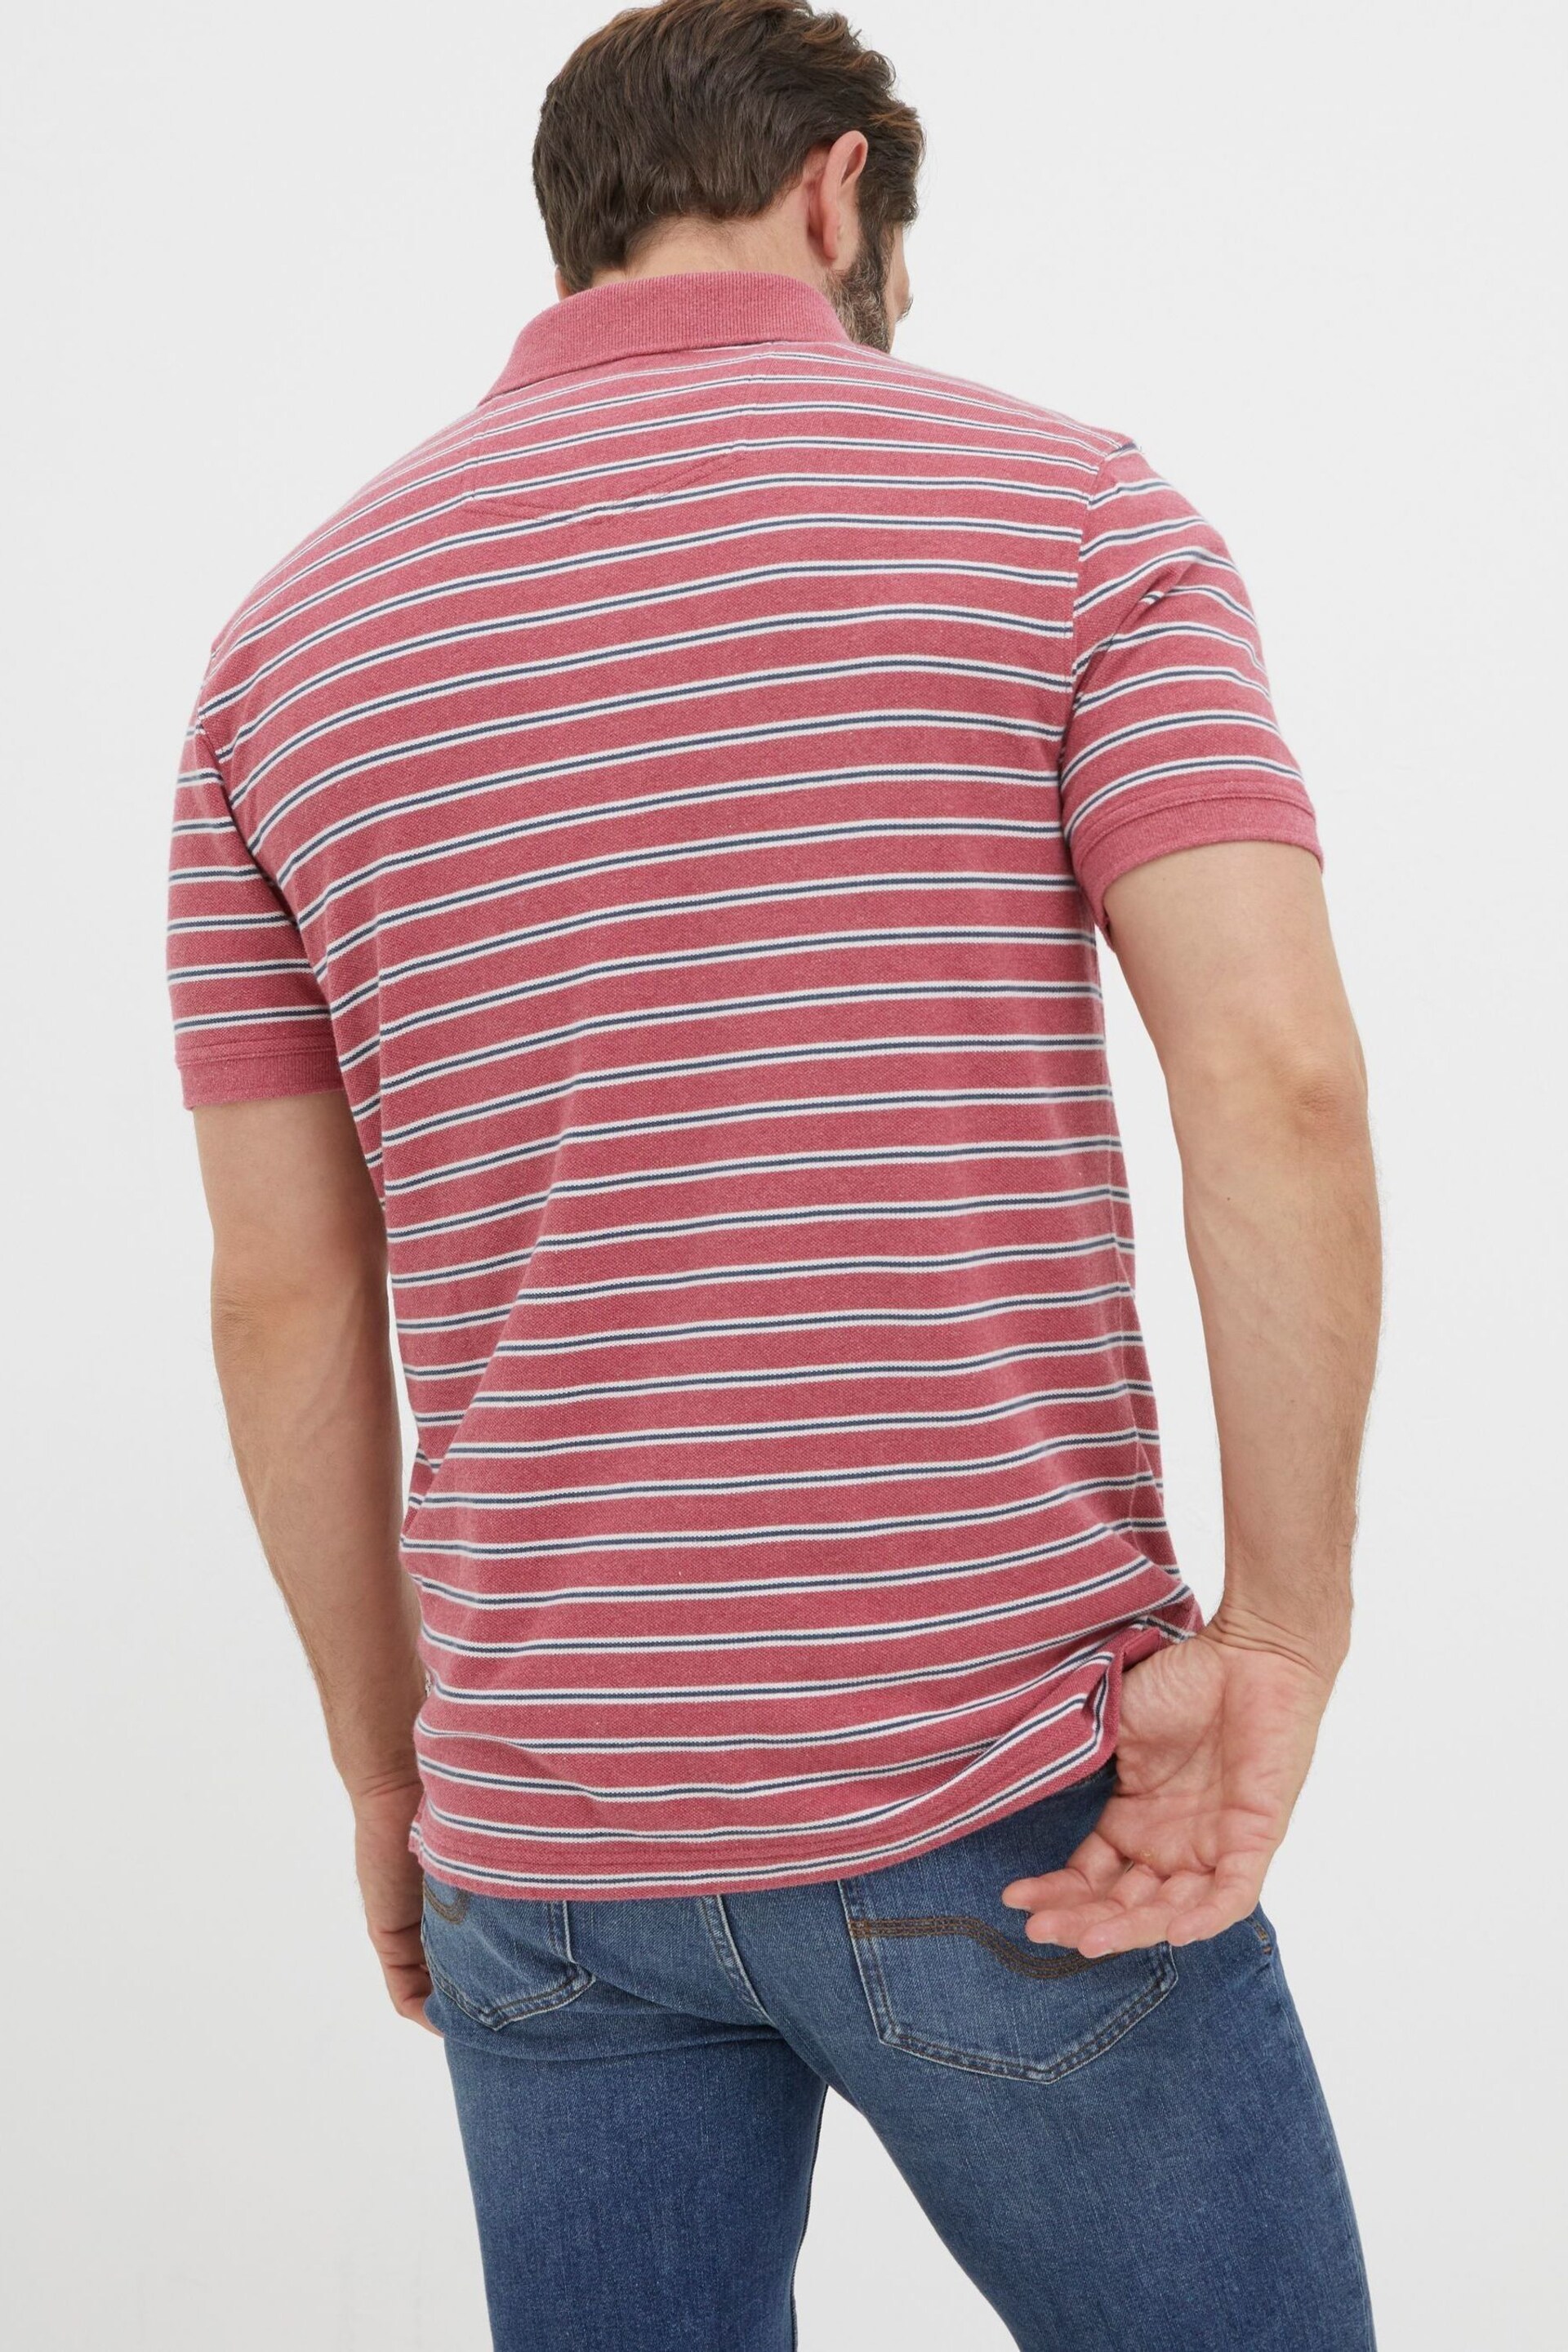 FatFace Pink Stripe Polo Shirt - Image 2 of 5